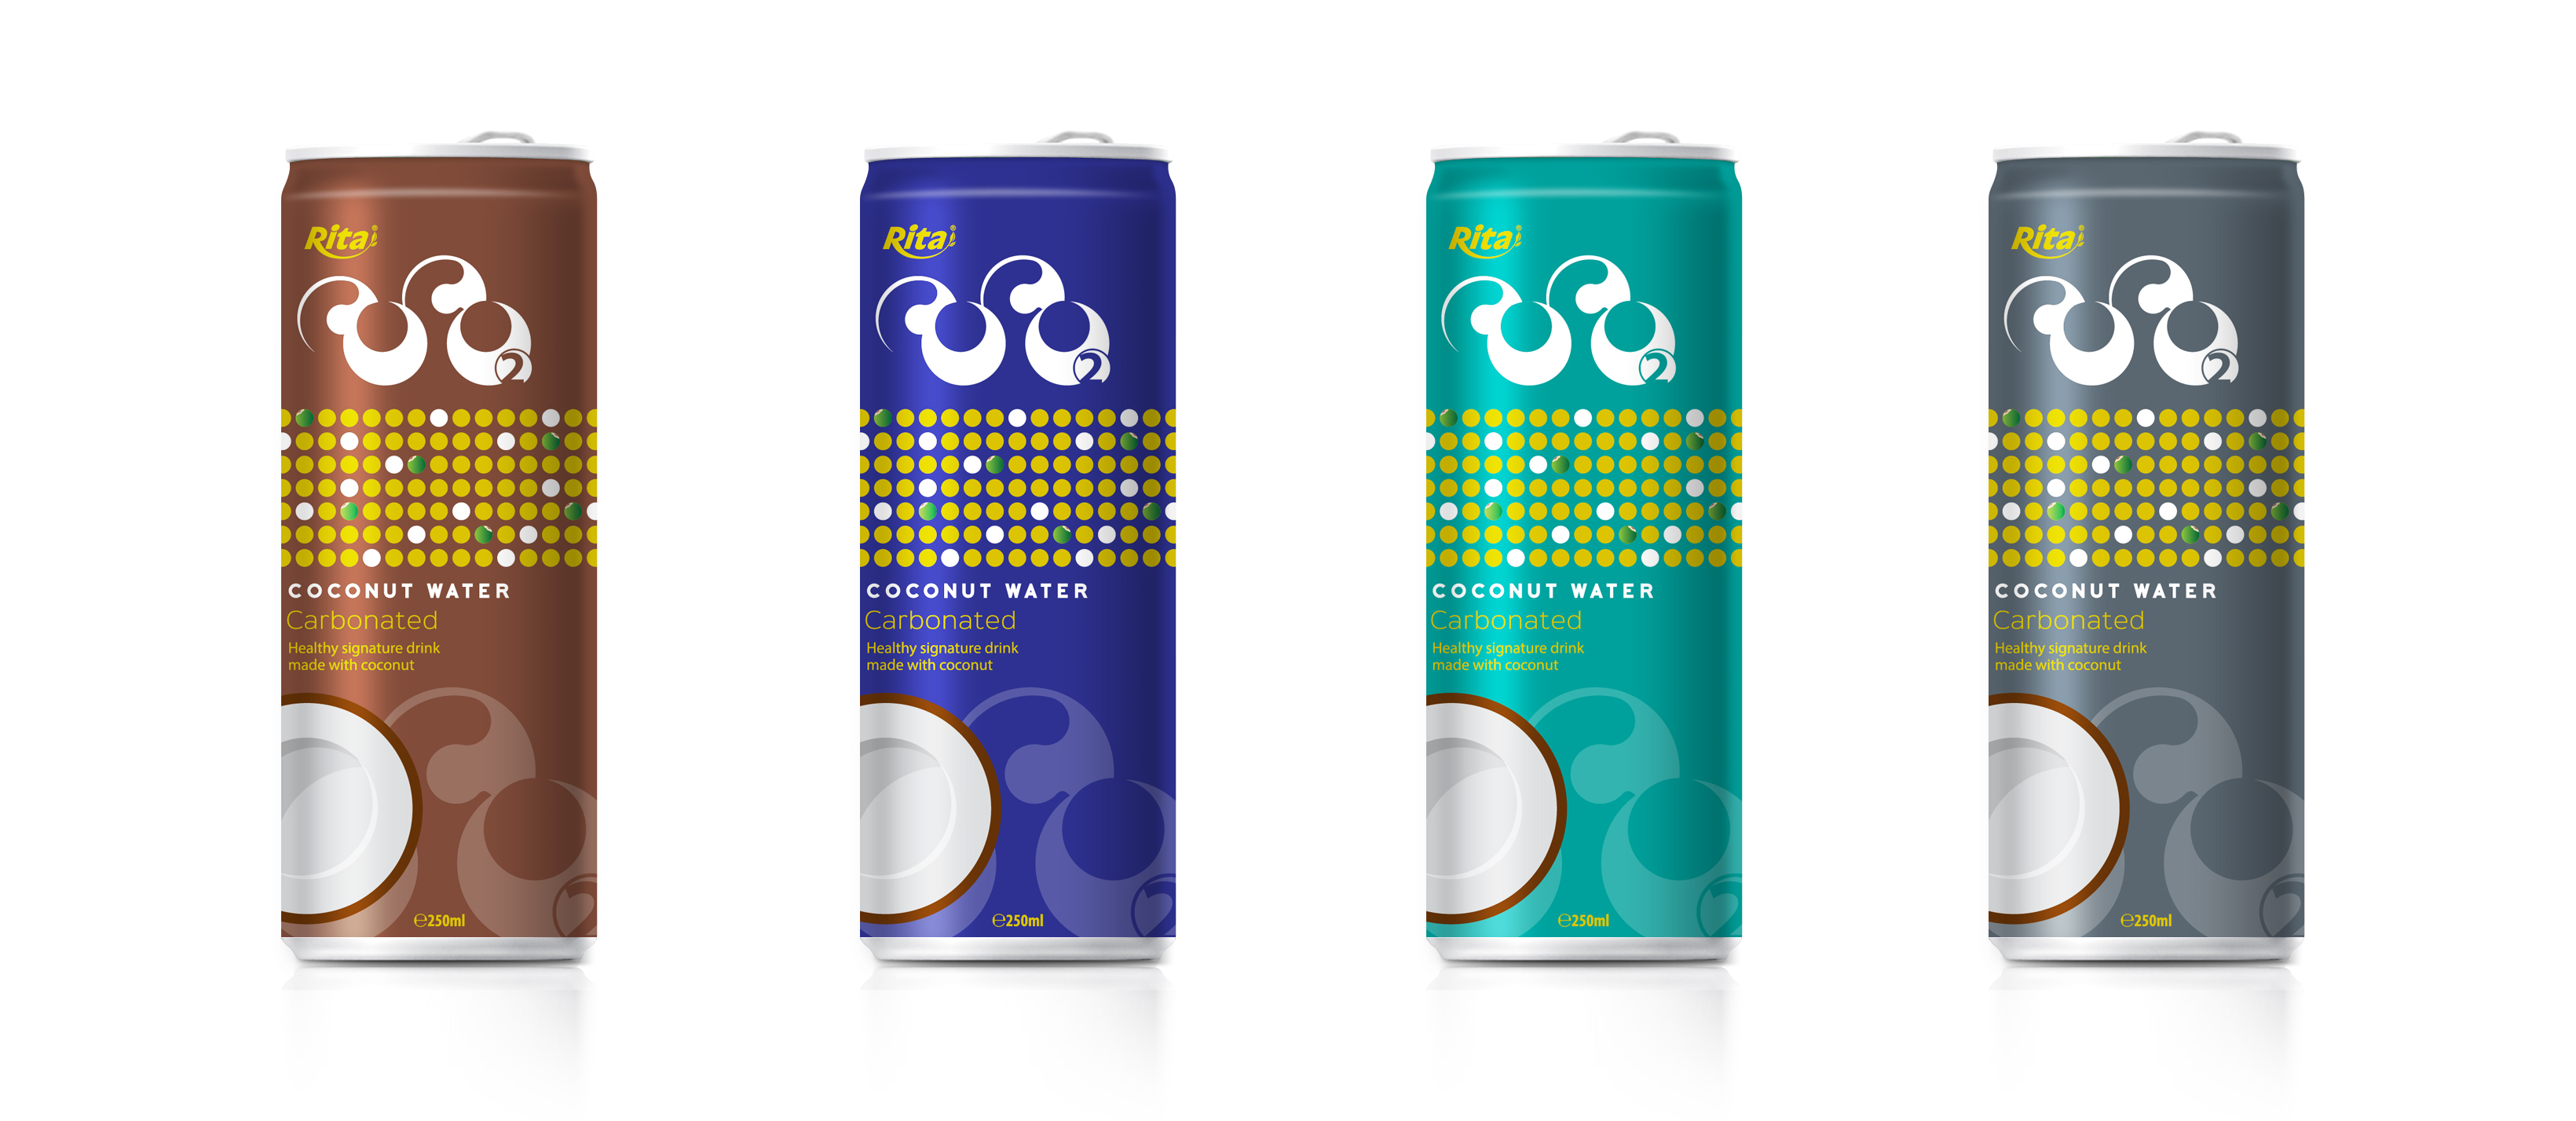 Carbonated coconut water 250ml slim can